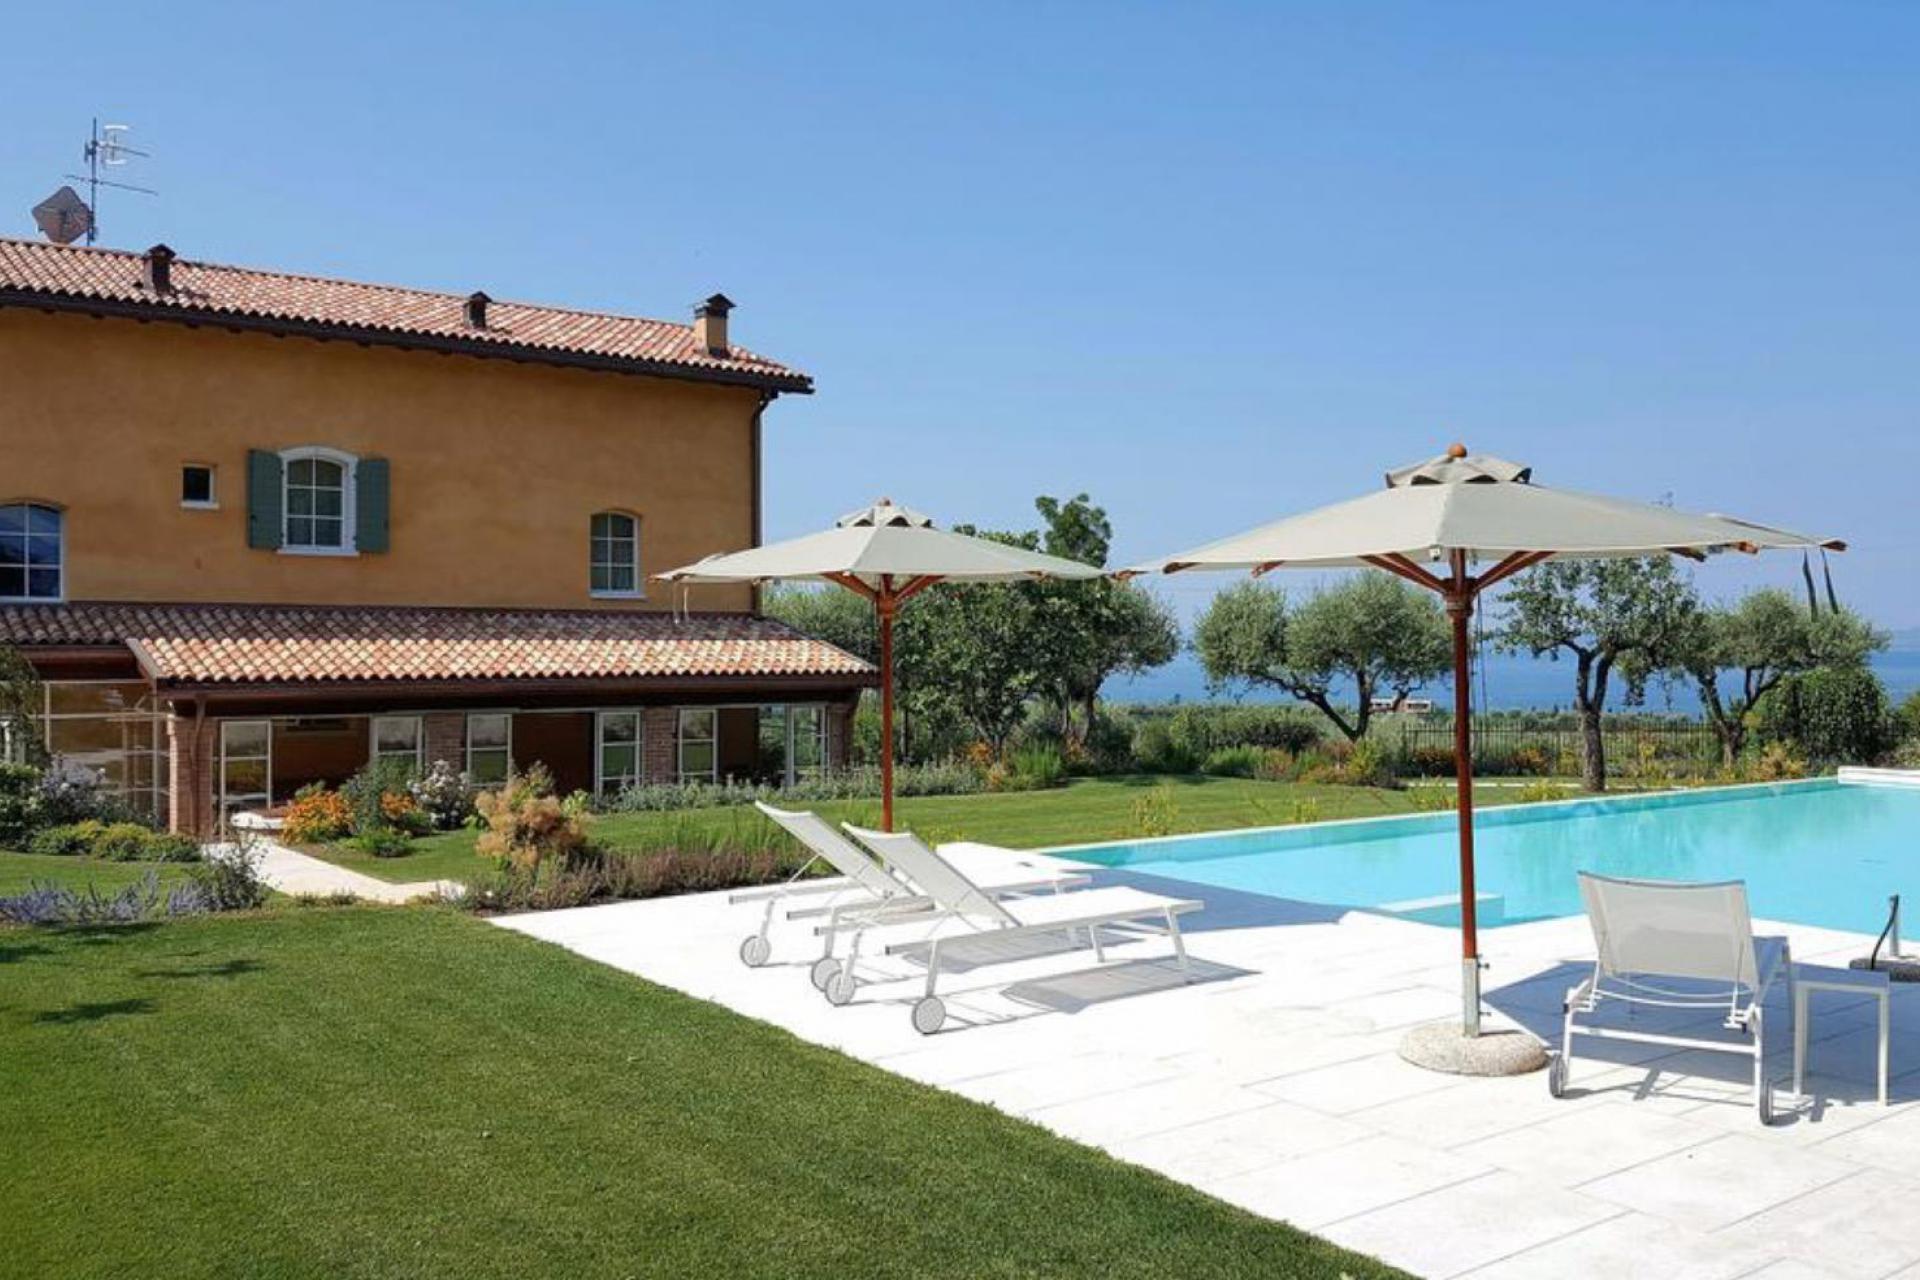 Charming agriturismo with a view of Lake Garda